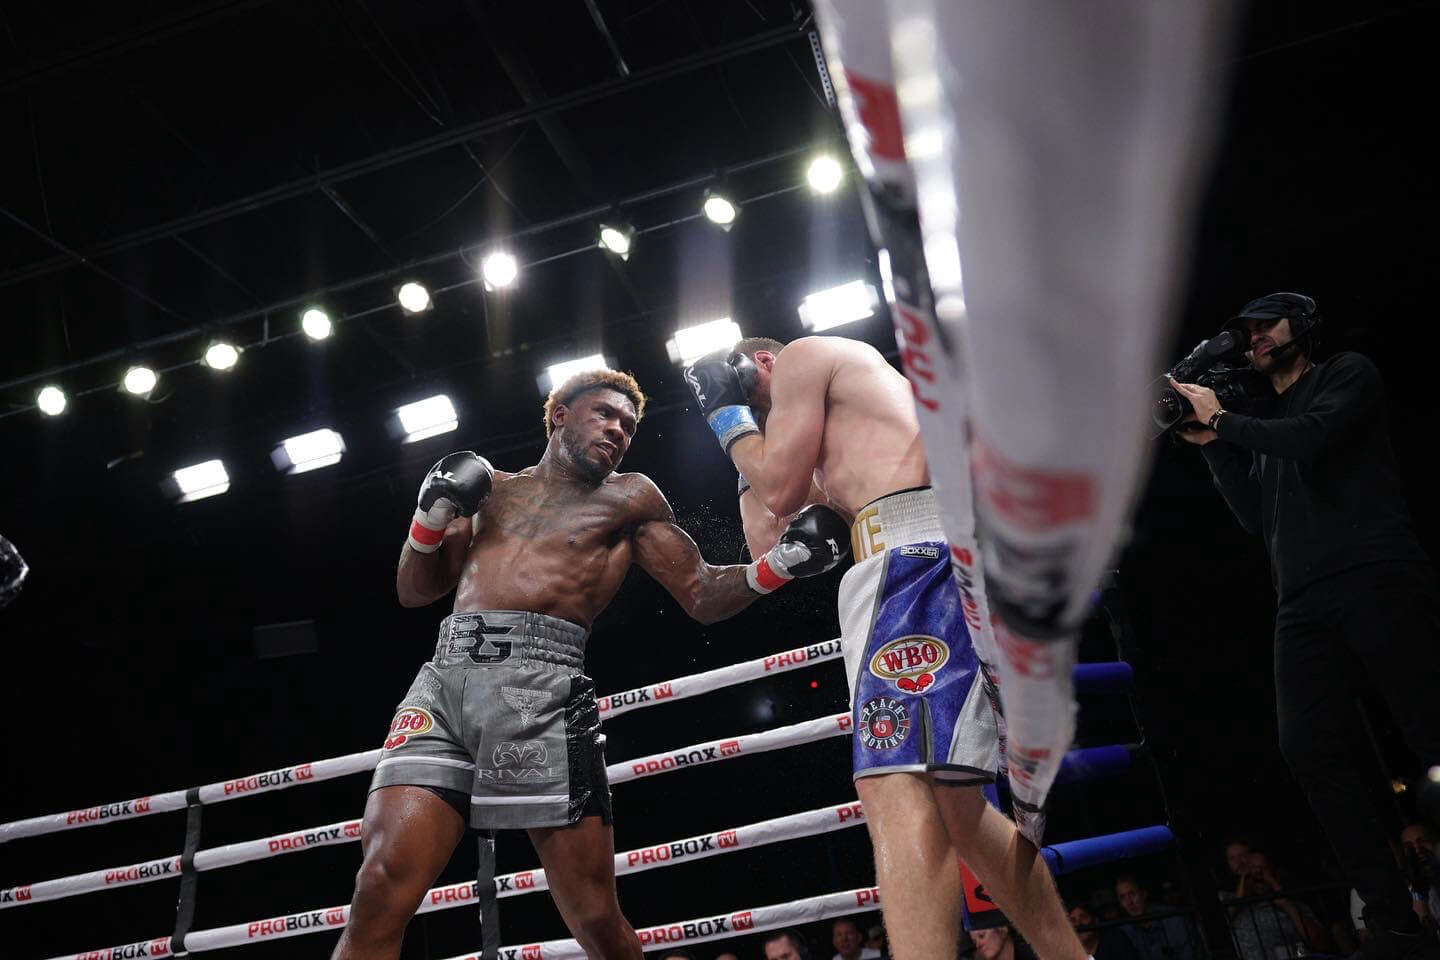 DAVID LIGHT EDGES CONTROVERSIAL WAR OF ATTRITION ON PROBOX TV: RESULTS FROM TAMPA, FL